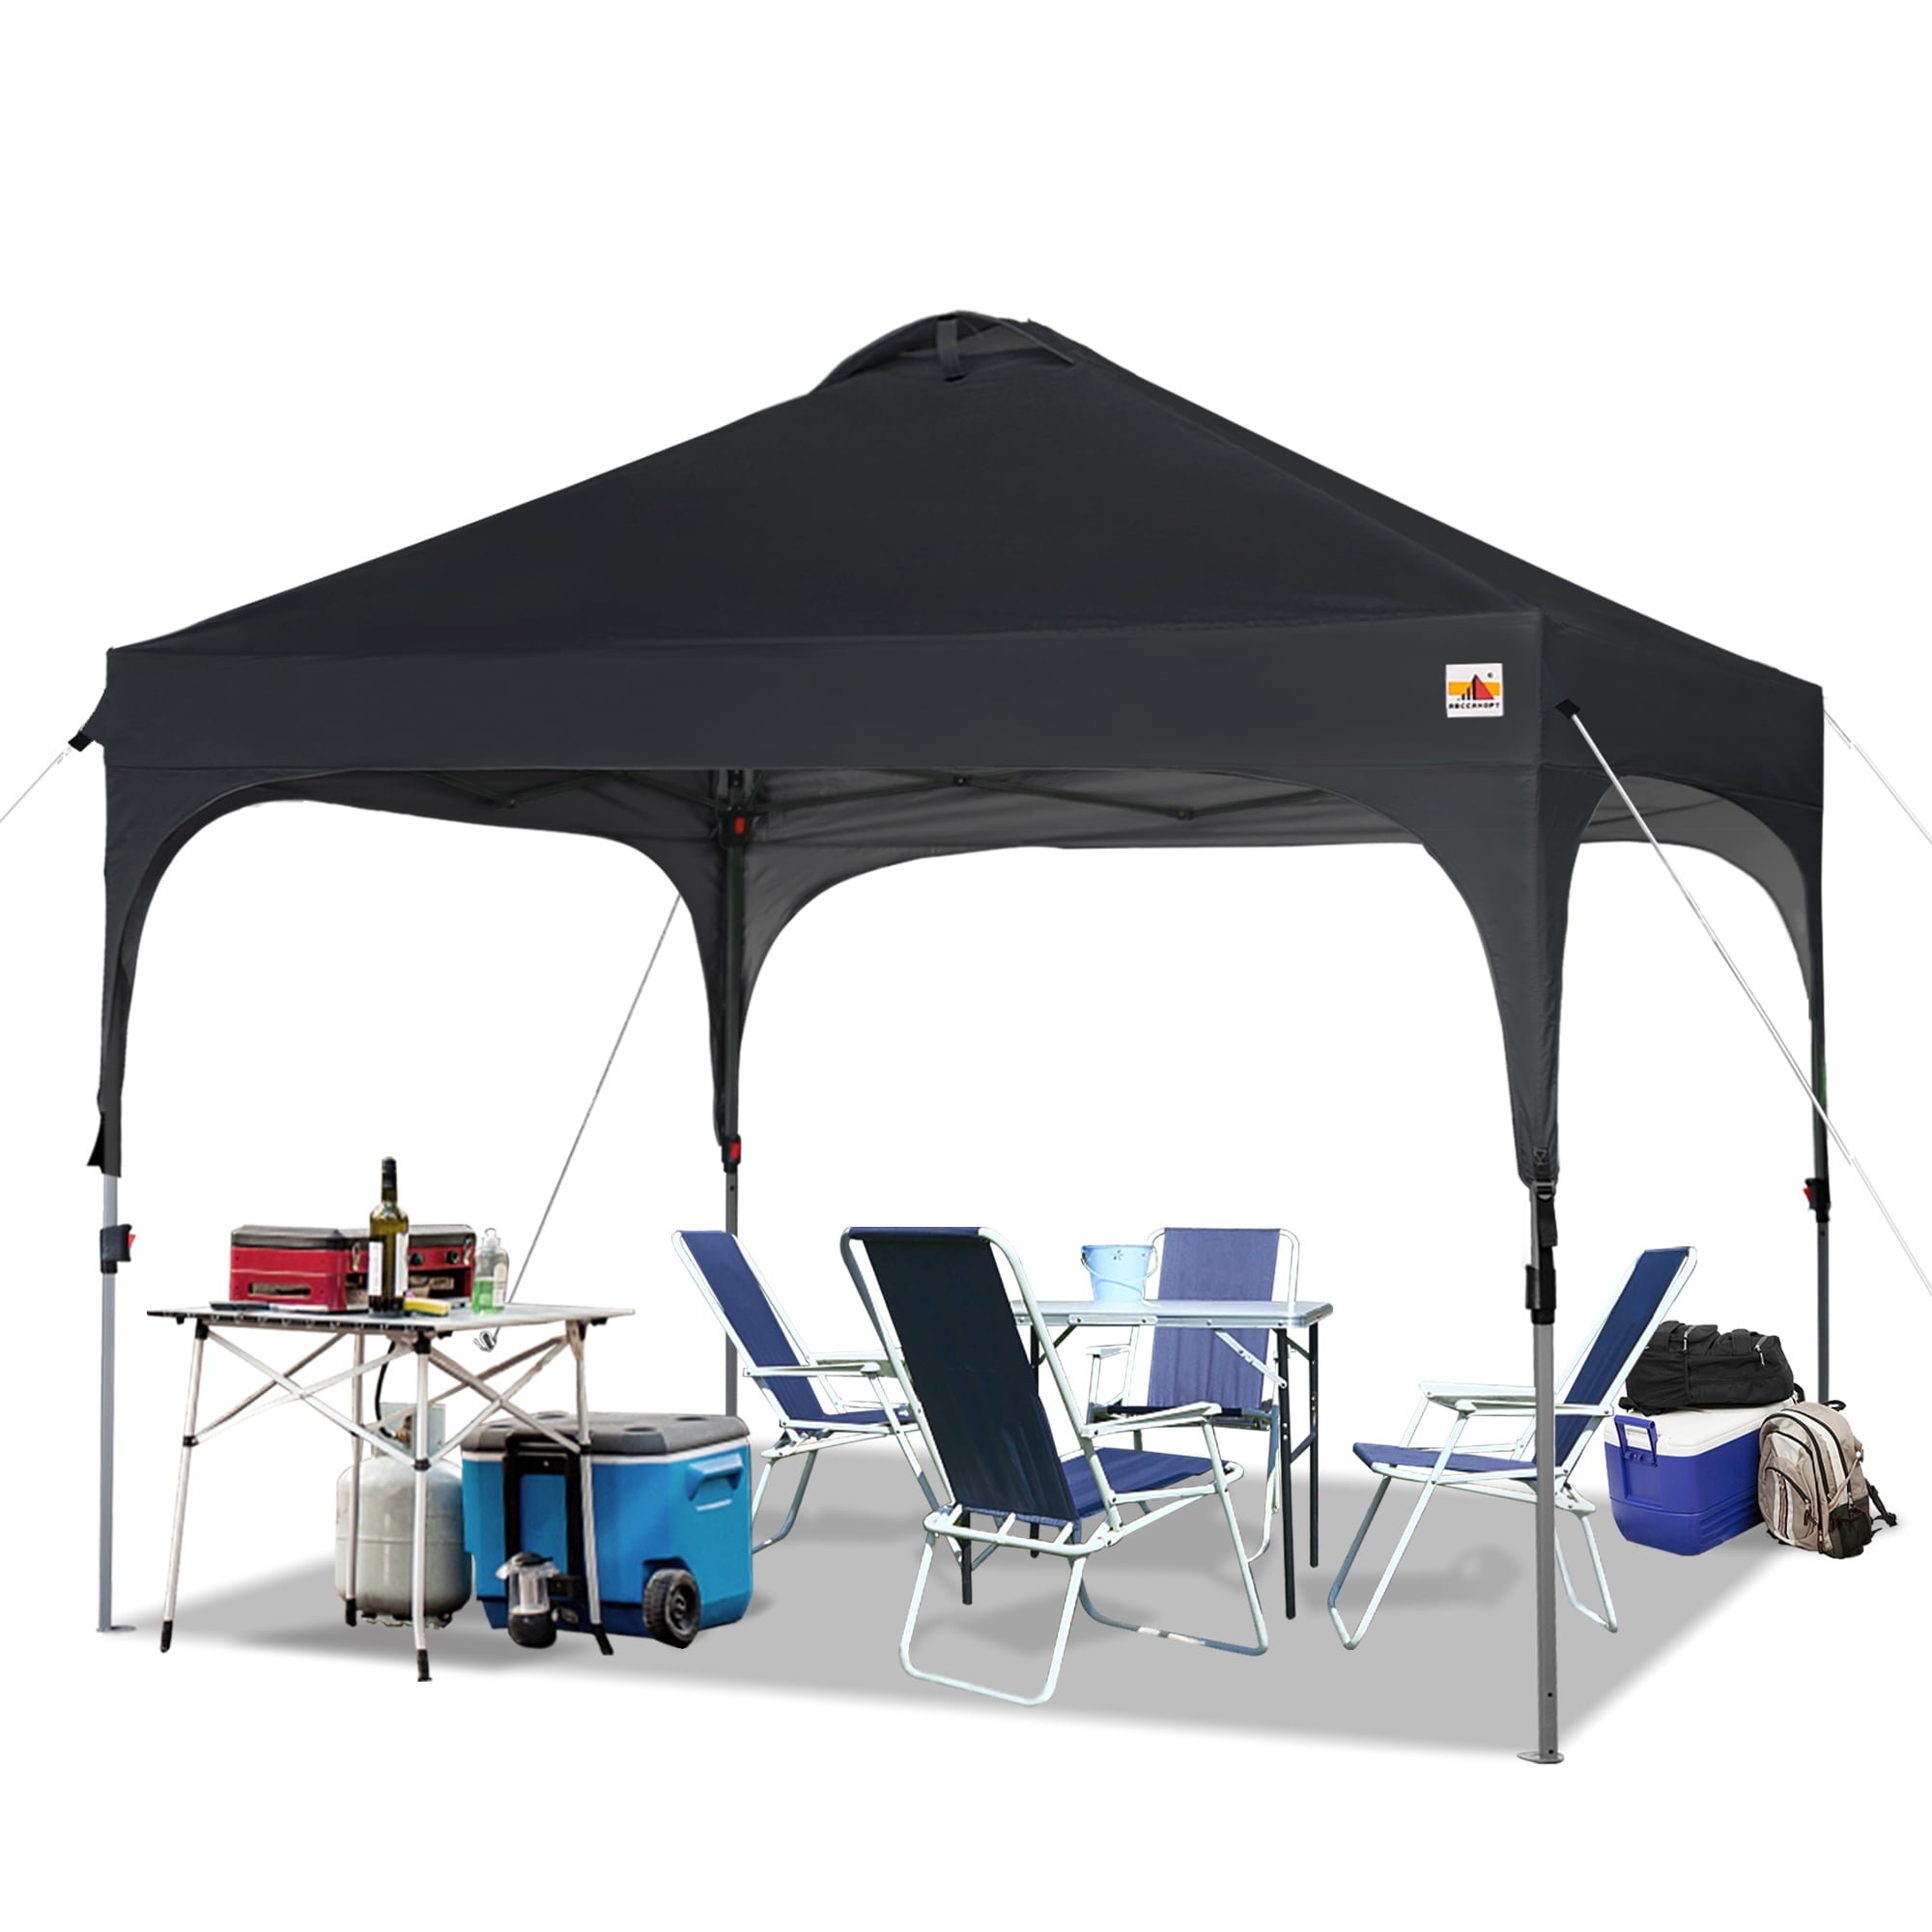 Gray ABCCANOPY Outdoor Pop up Canopy Tent 8x8 Camping Sun Shelter-Series 